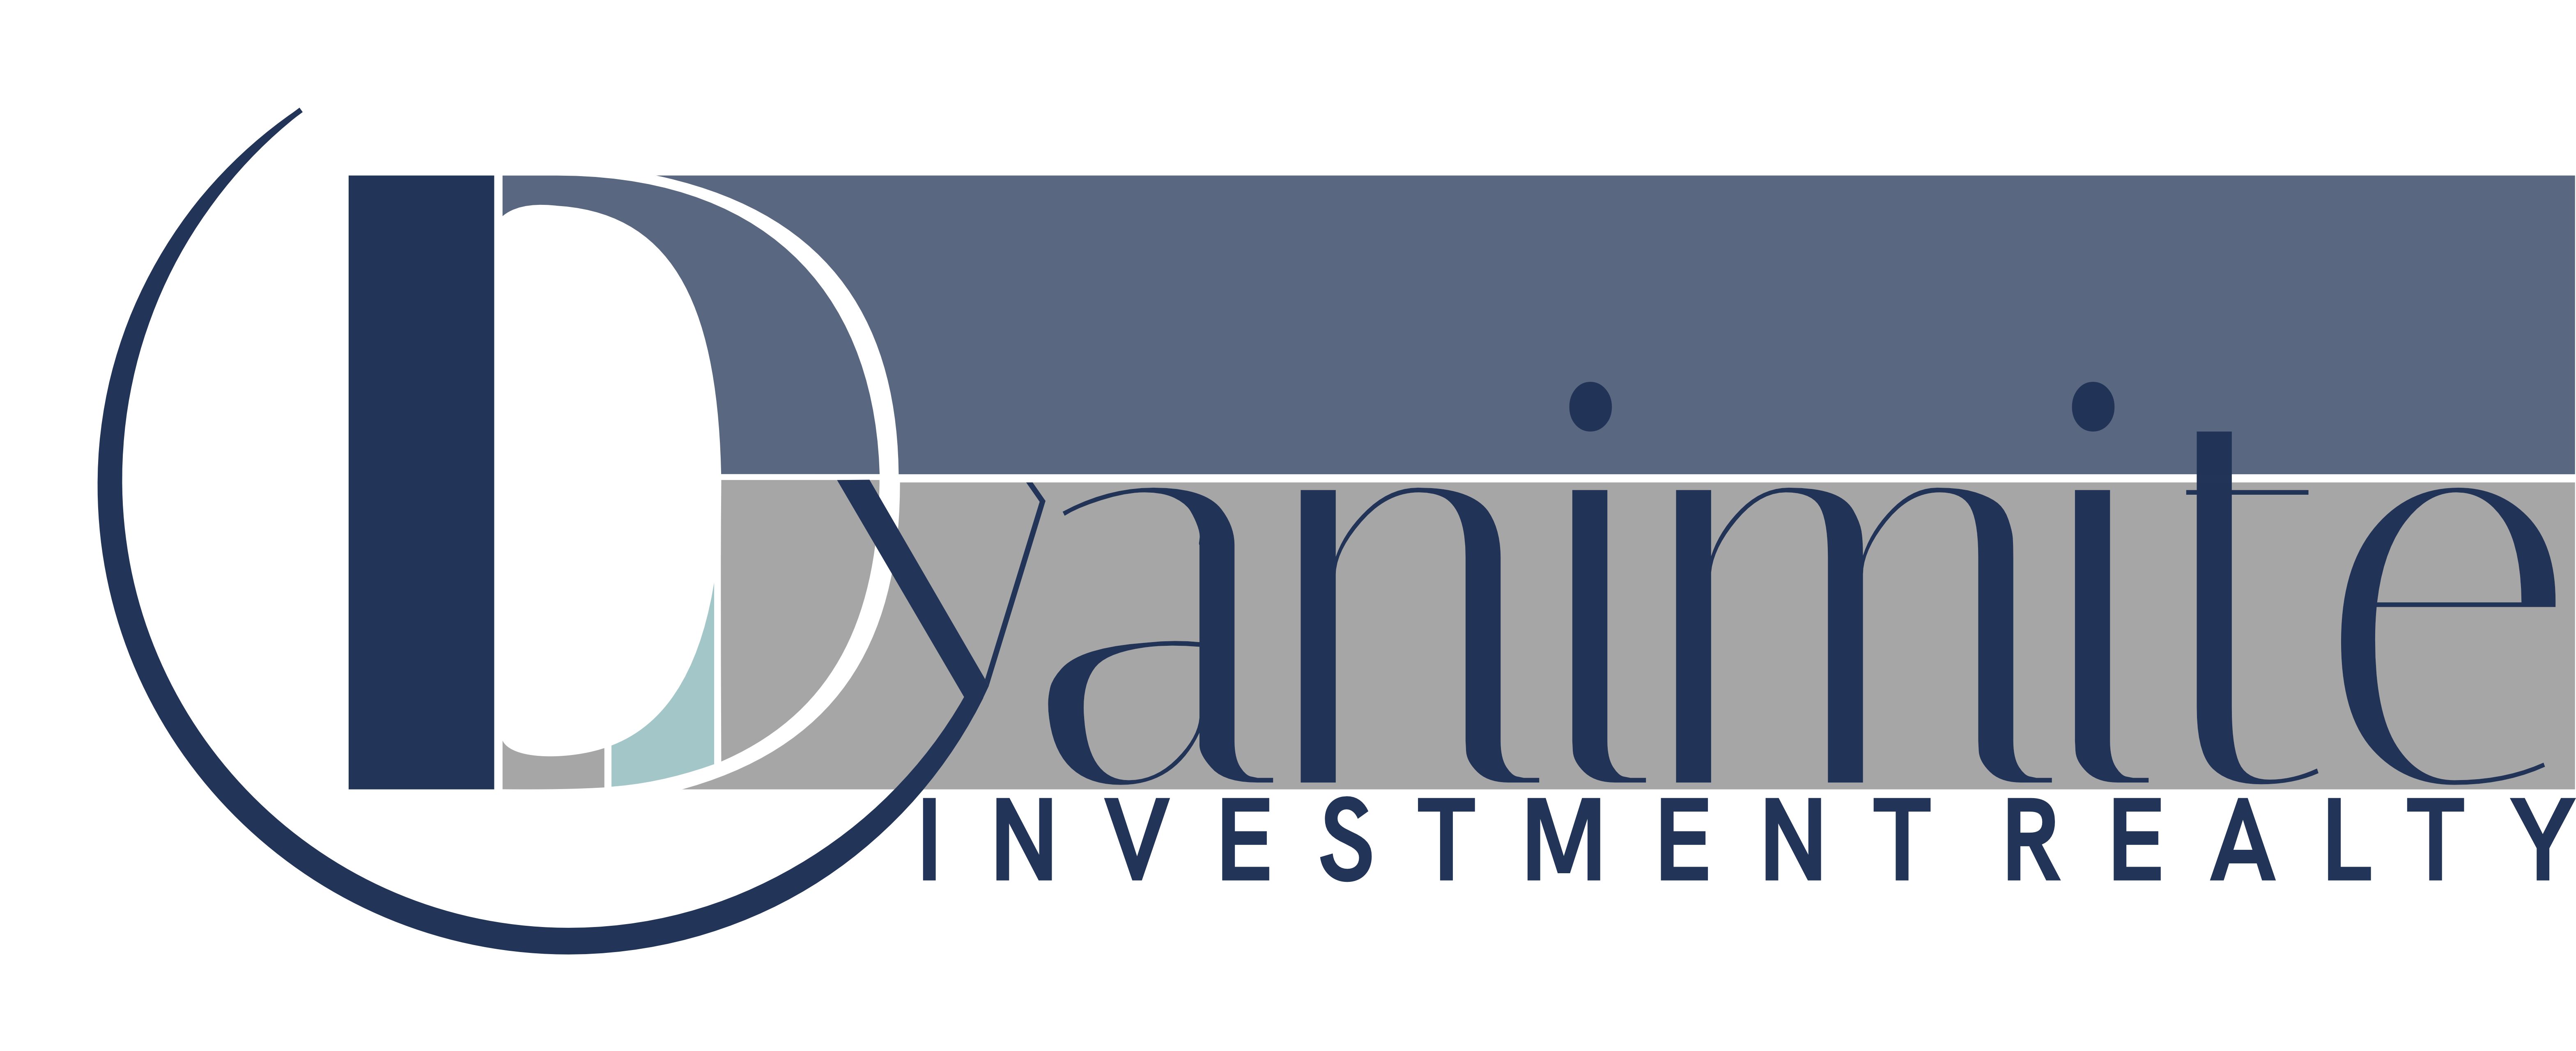 Dyanimite Investment Realty